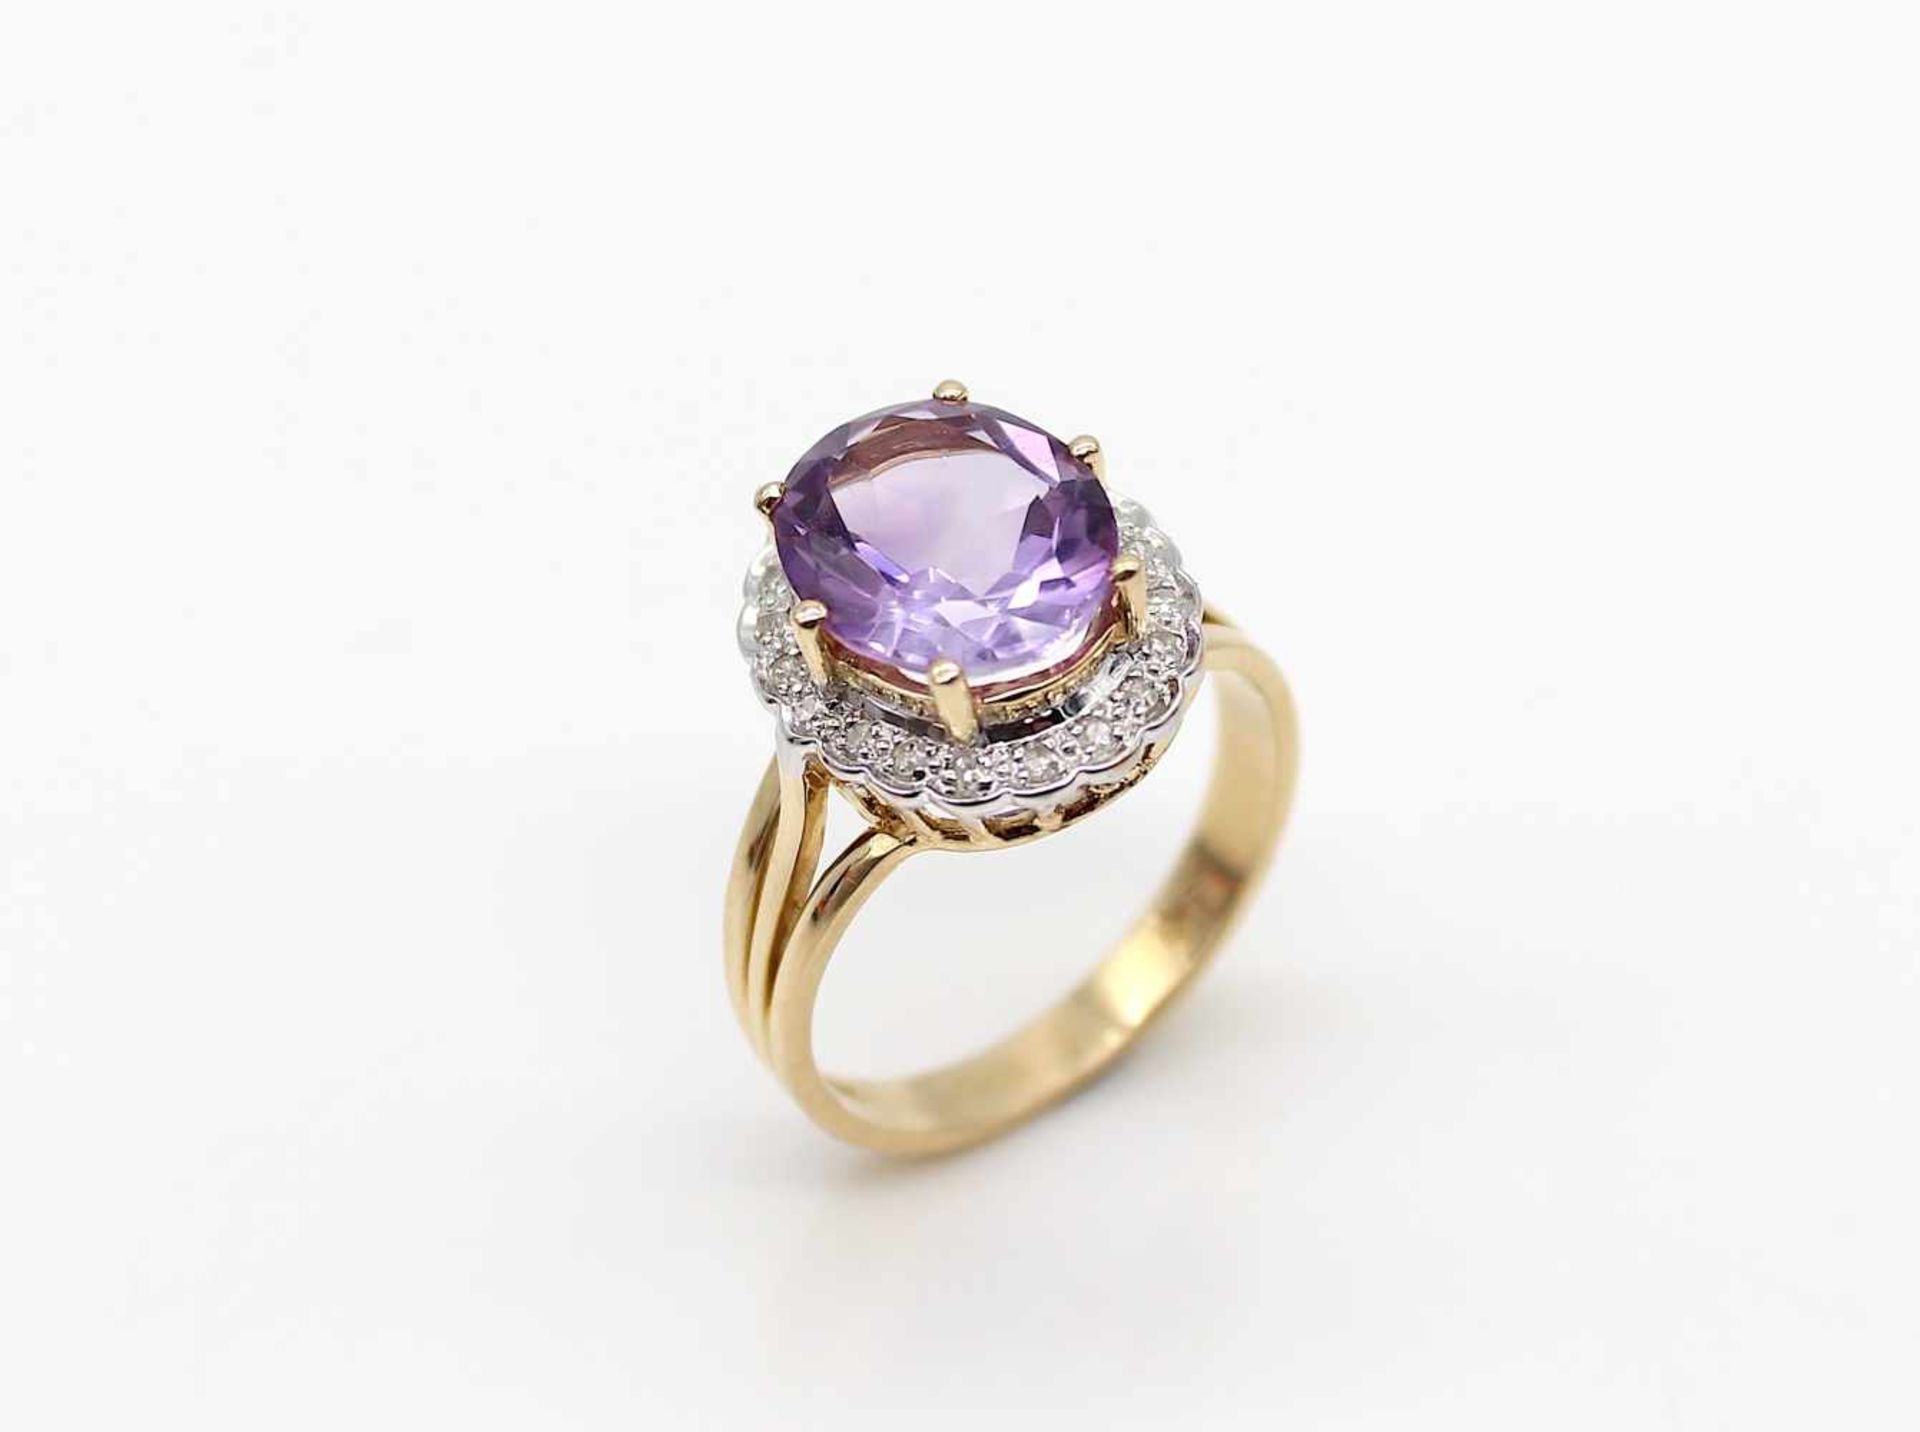 Ring of 585 gold with an amethyst and 20 diamonds, total approx. 0.15 ct.Weight 5.8 g, size 60- - - - Bild 3 aus 3